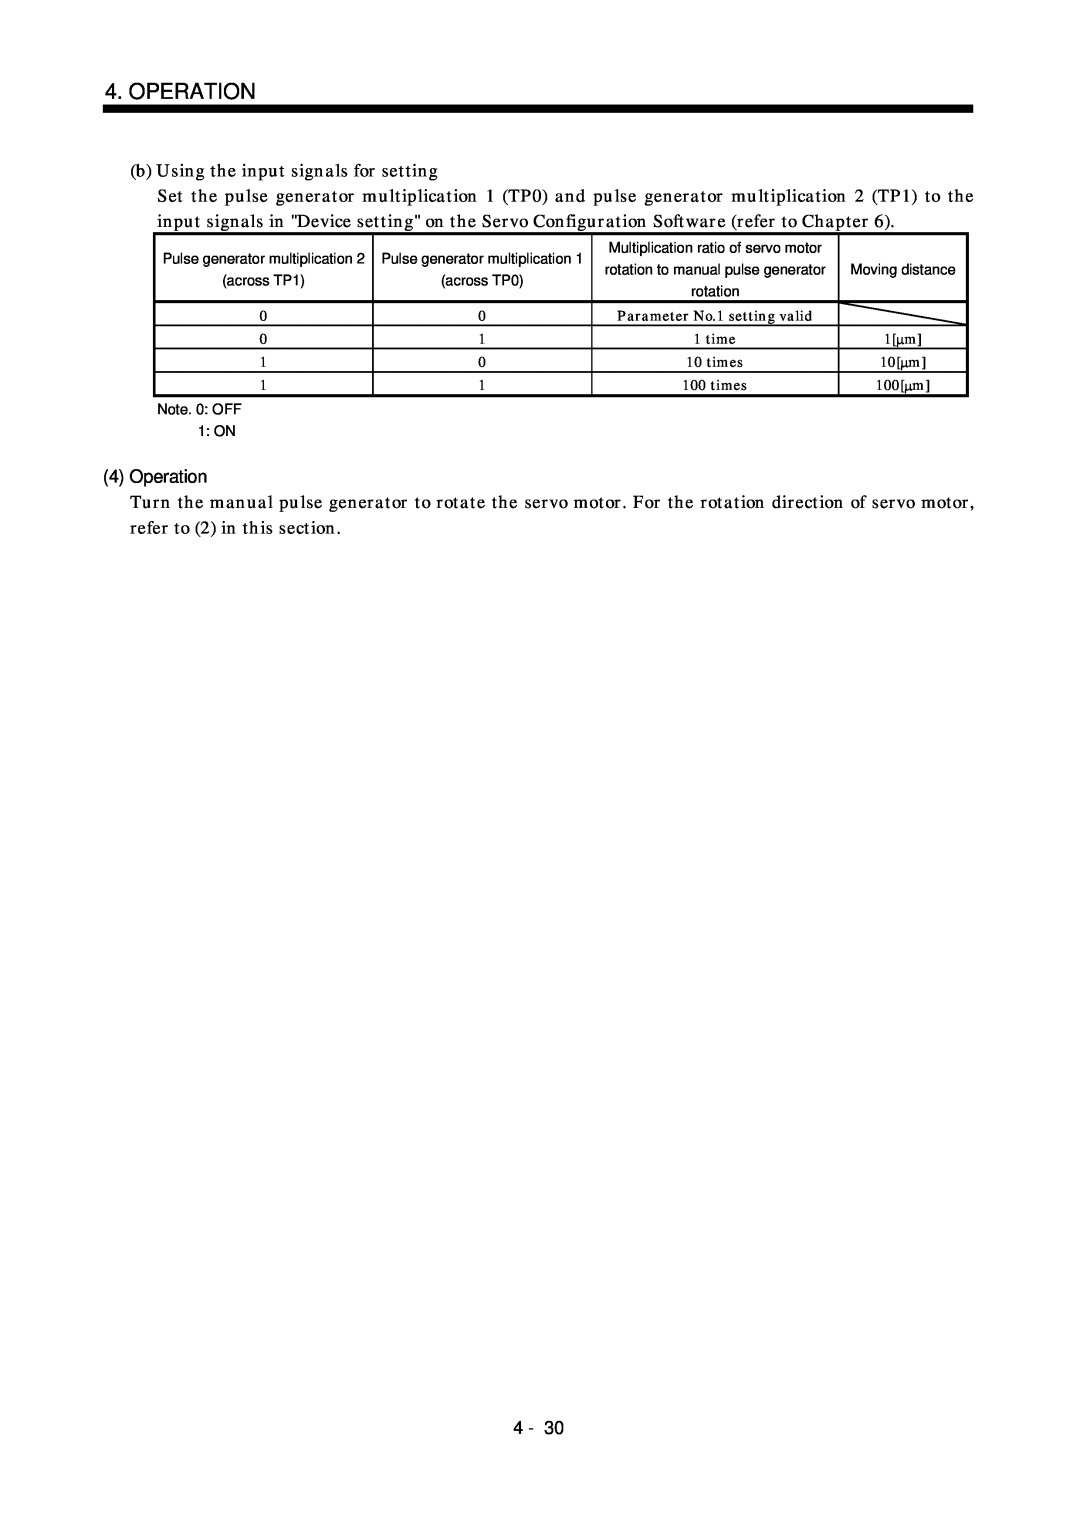 Mitsubishi Electronics MR-J2S- CL specifications 4Operation 